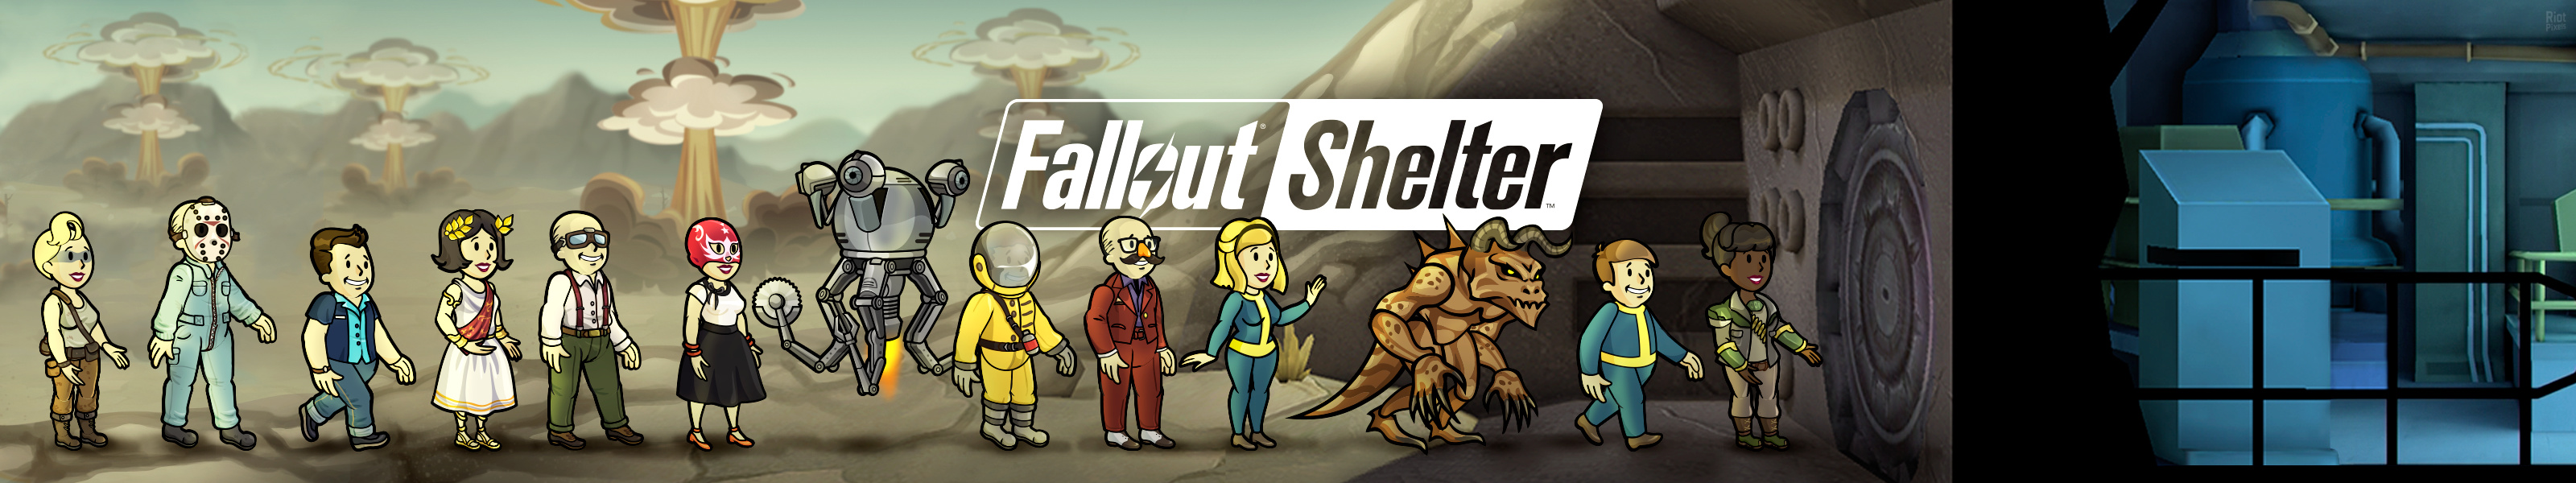 Fallout 4 fallout shelter game фото 64